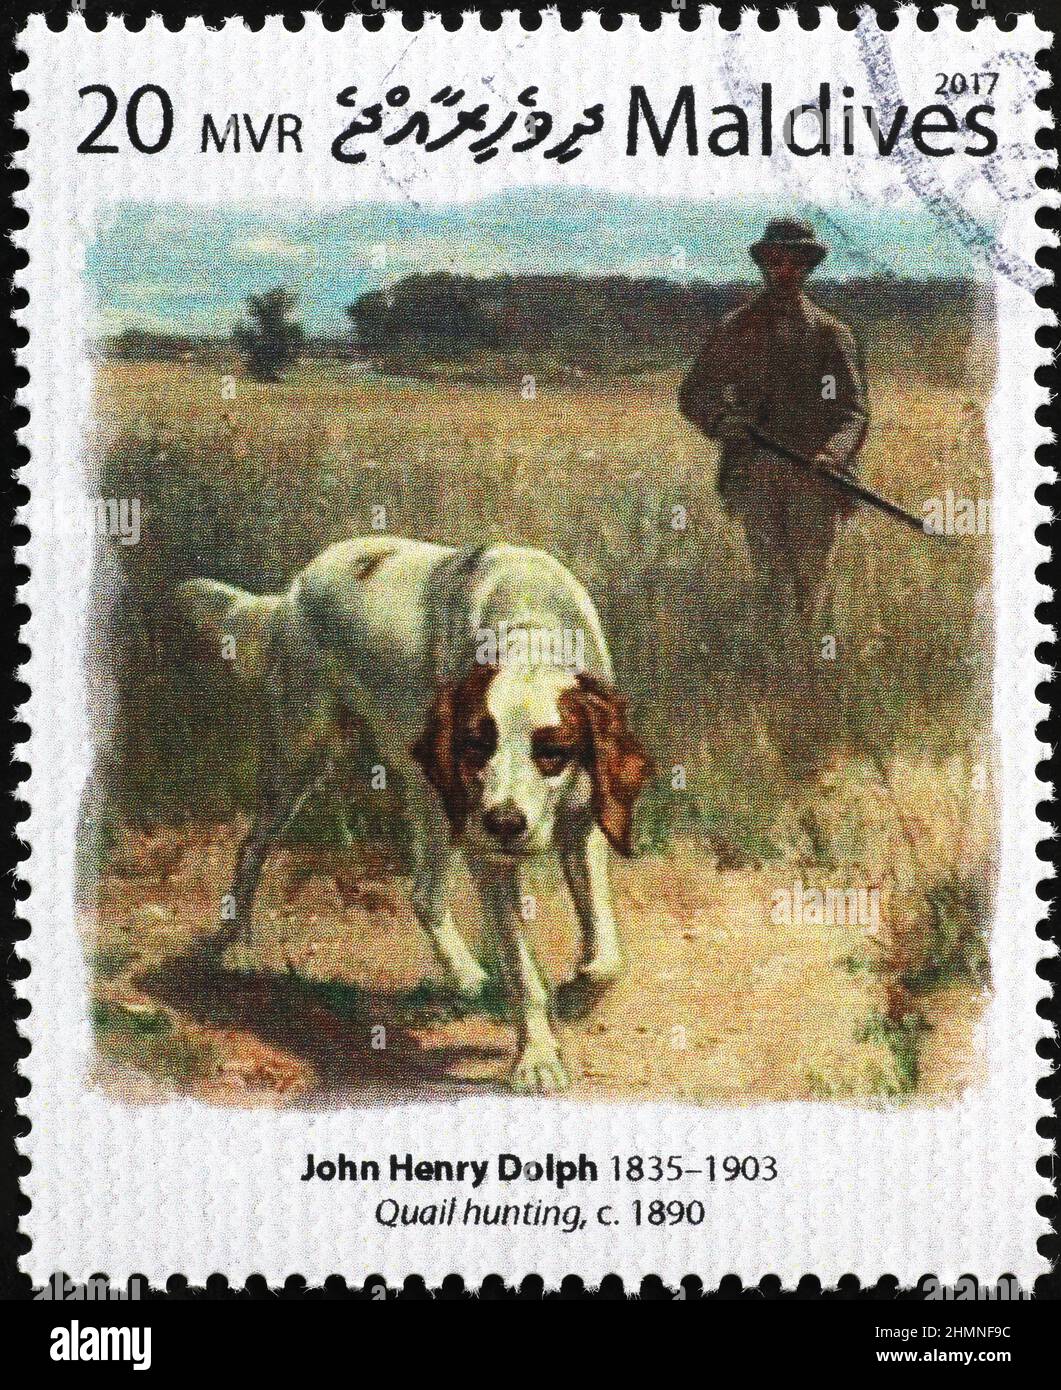 Quail hunting by John Henry Dolph on postage stamp Stock Photo